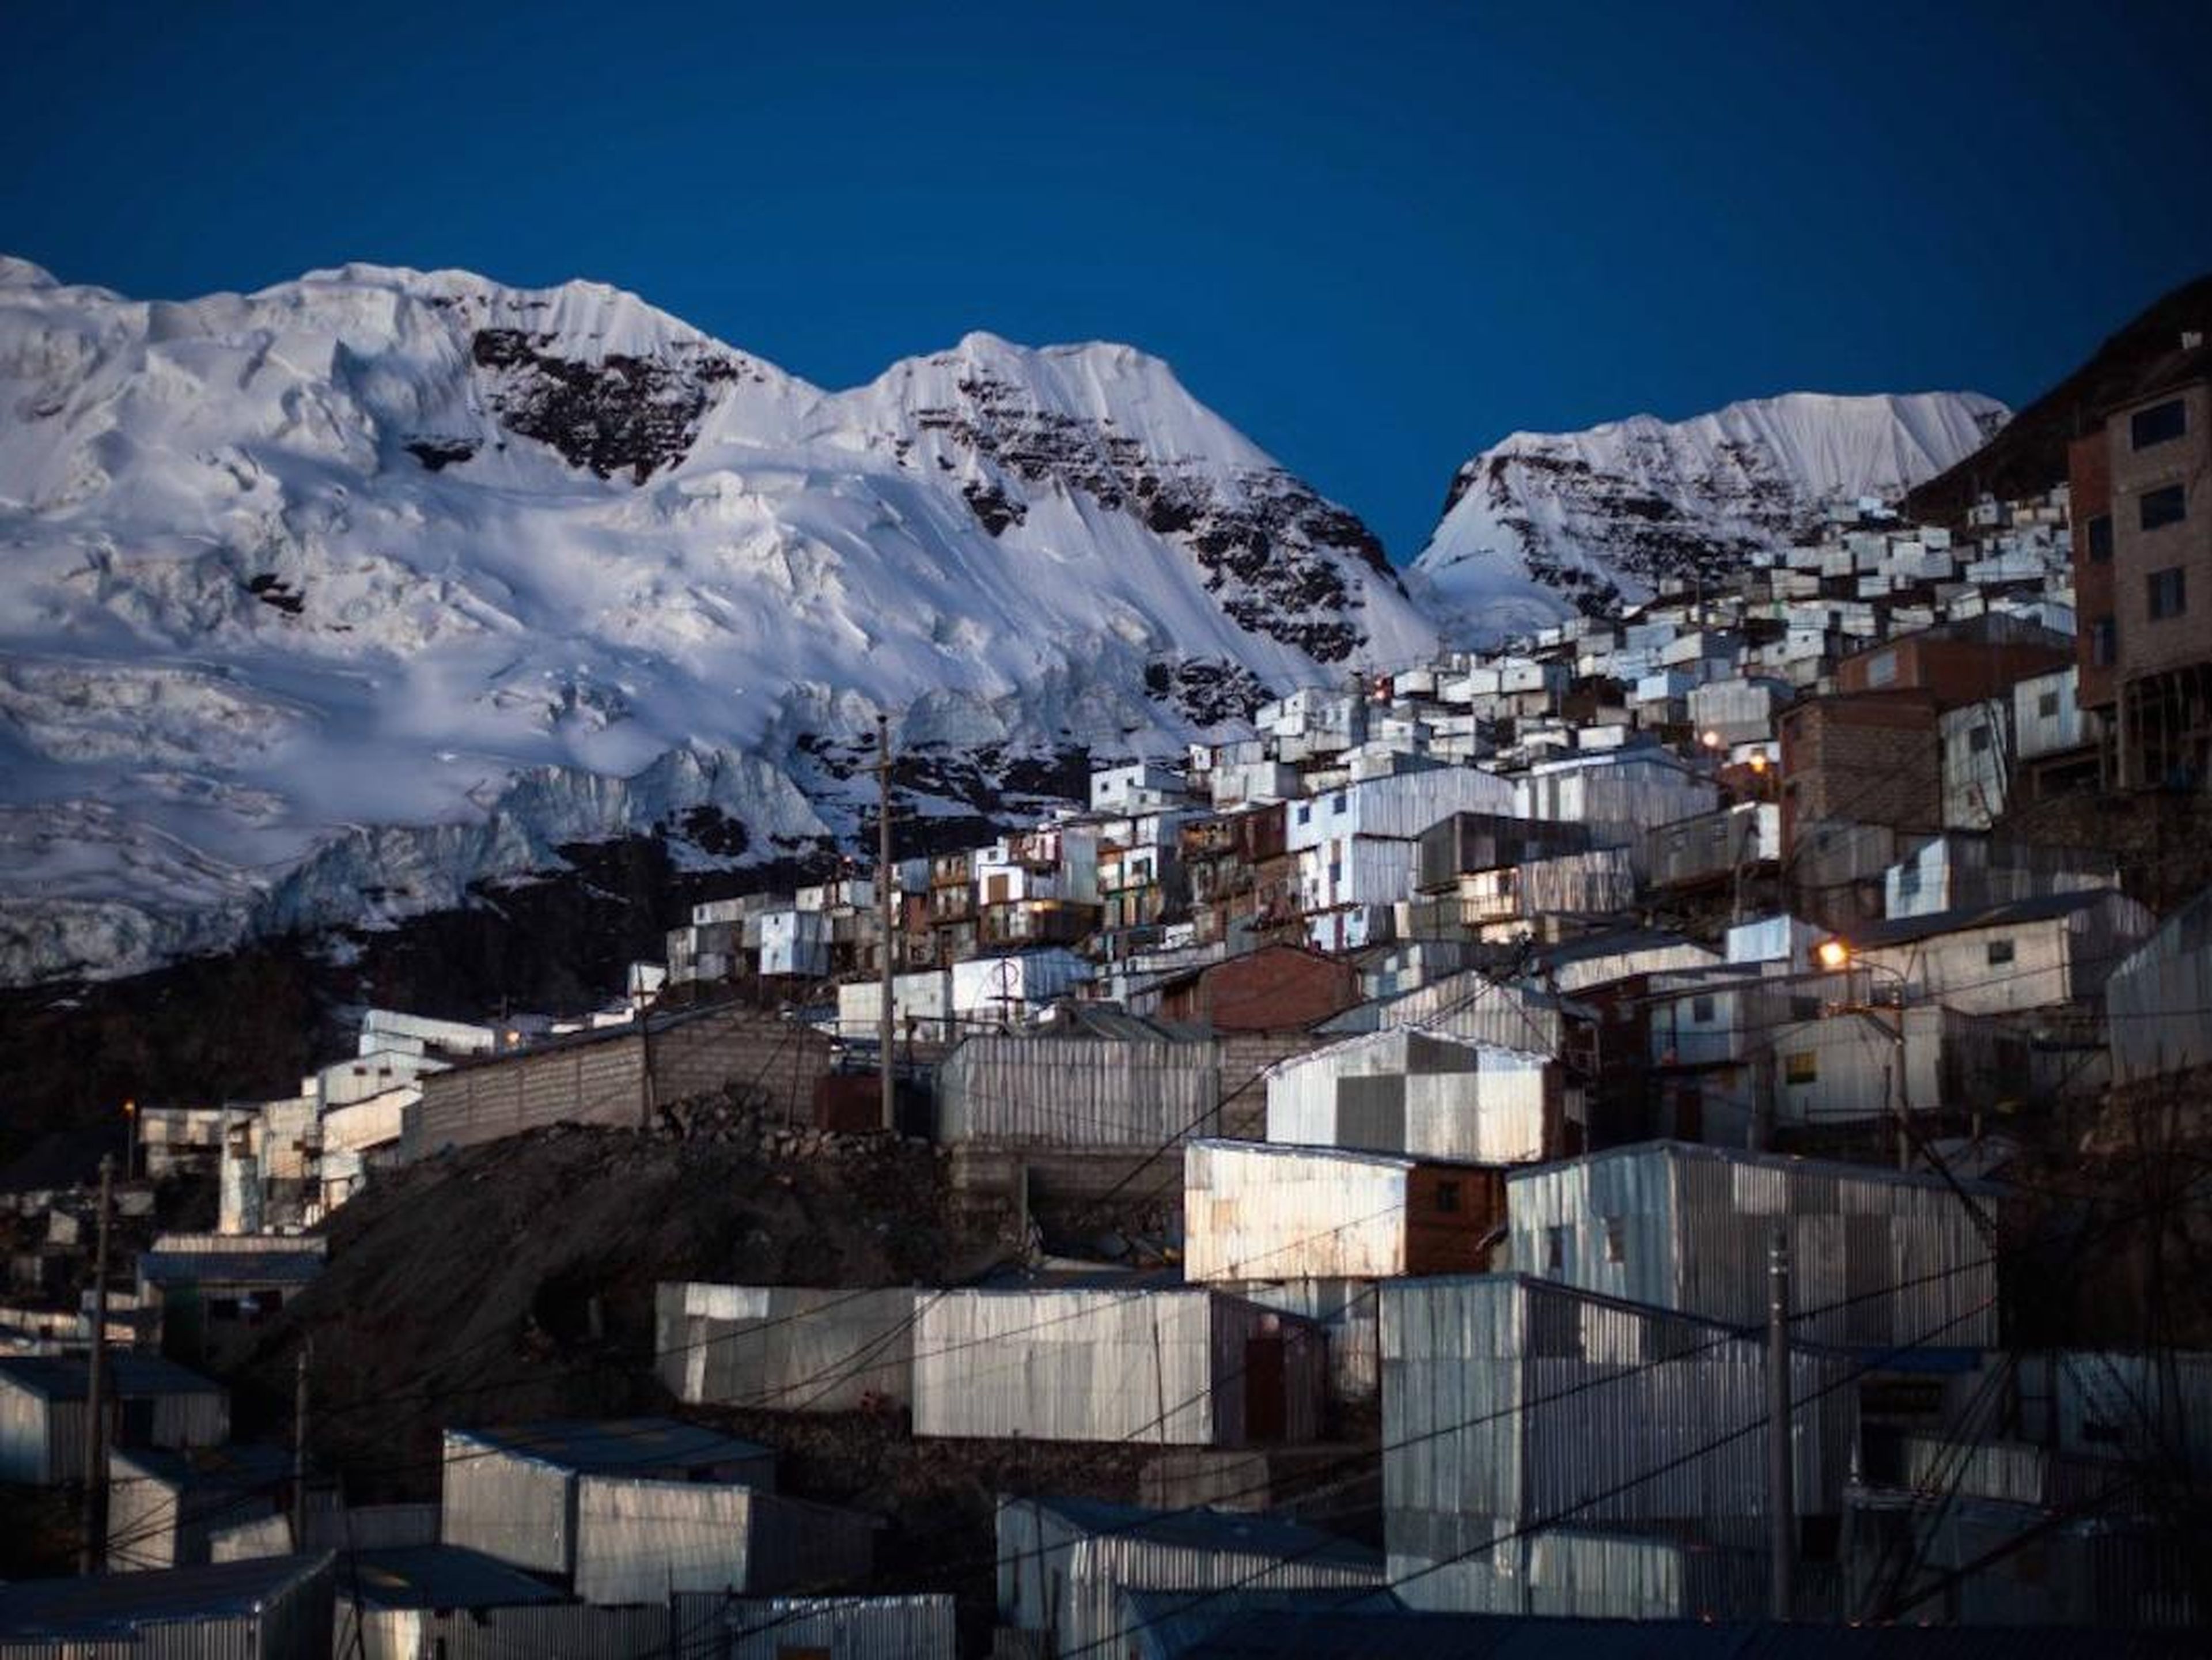 The settlement was built at an astonishing height of 16,700 feet and lies in the shadow of Bella Durmiente — or Sleeping Beauty — an enormous glacier that lurks over the town.